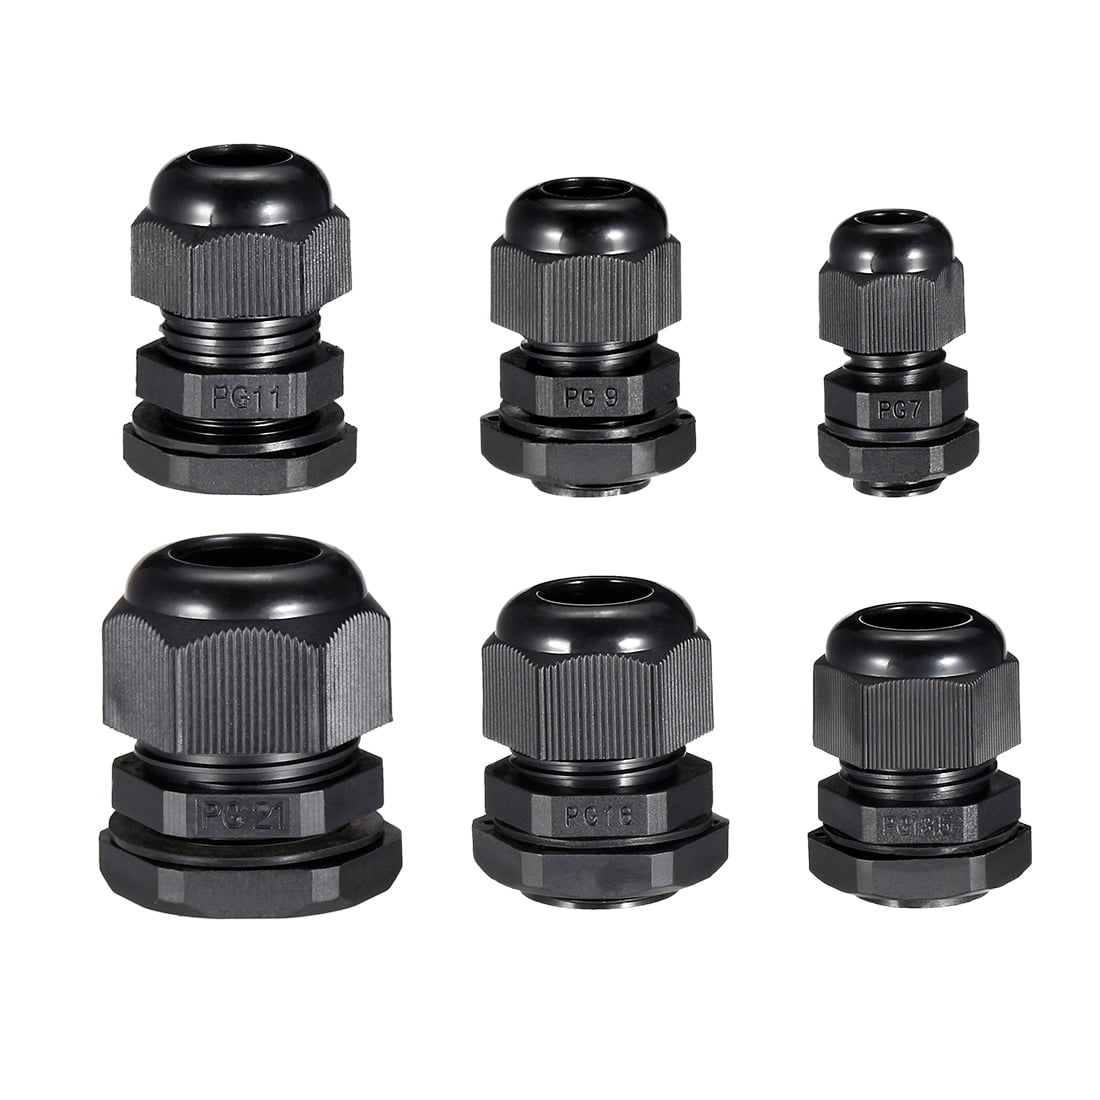 uxcell Cable Gland PG9 Metal Waterproof Cable Glands Joints Adjustable Connector for 4-8mm Dia Cable Pack of 5 